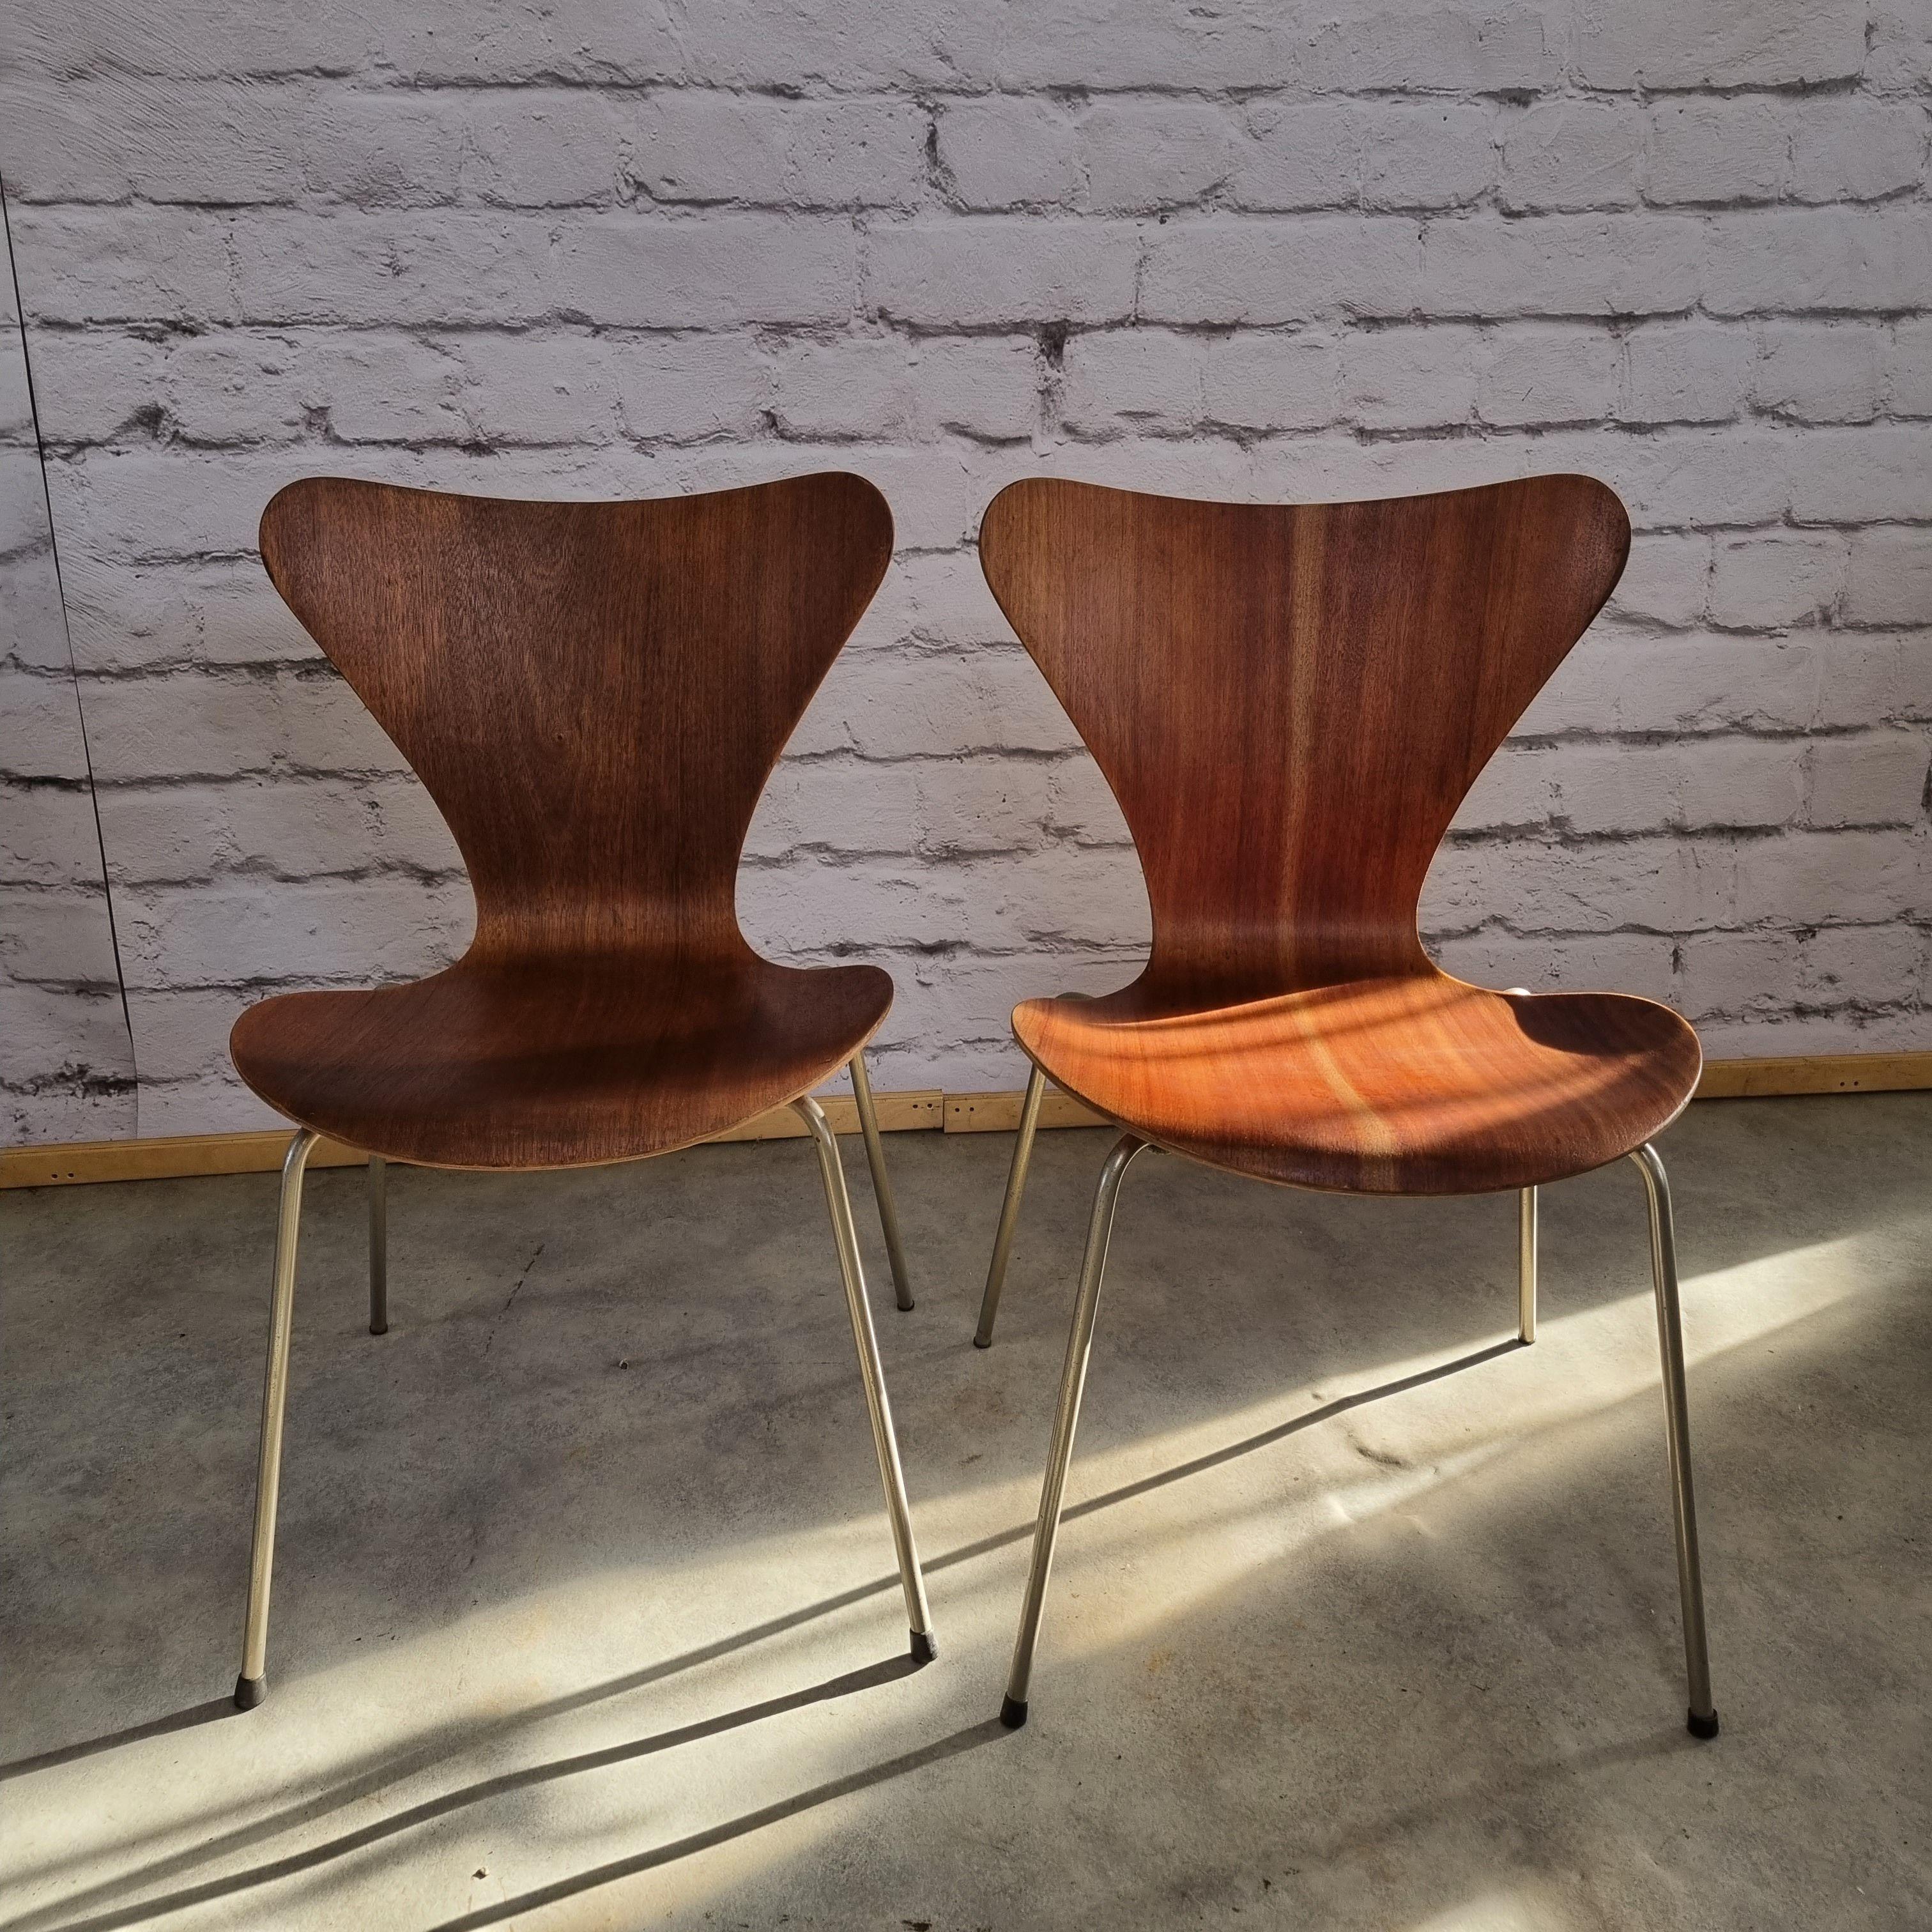 3107 chairs designed by Arne Jacobsen for Fritz Hansen, teak veneer. This chair is also called the butterfly chair due to this unique shape. The chair has been refurbished and oiled. Iconic item!